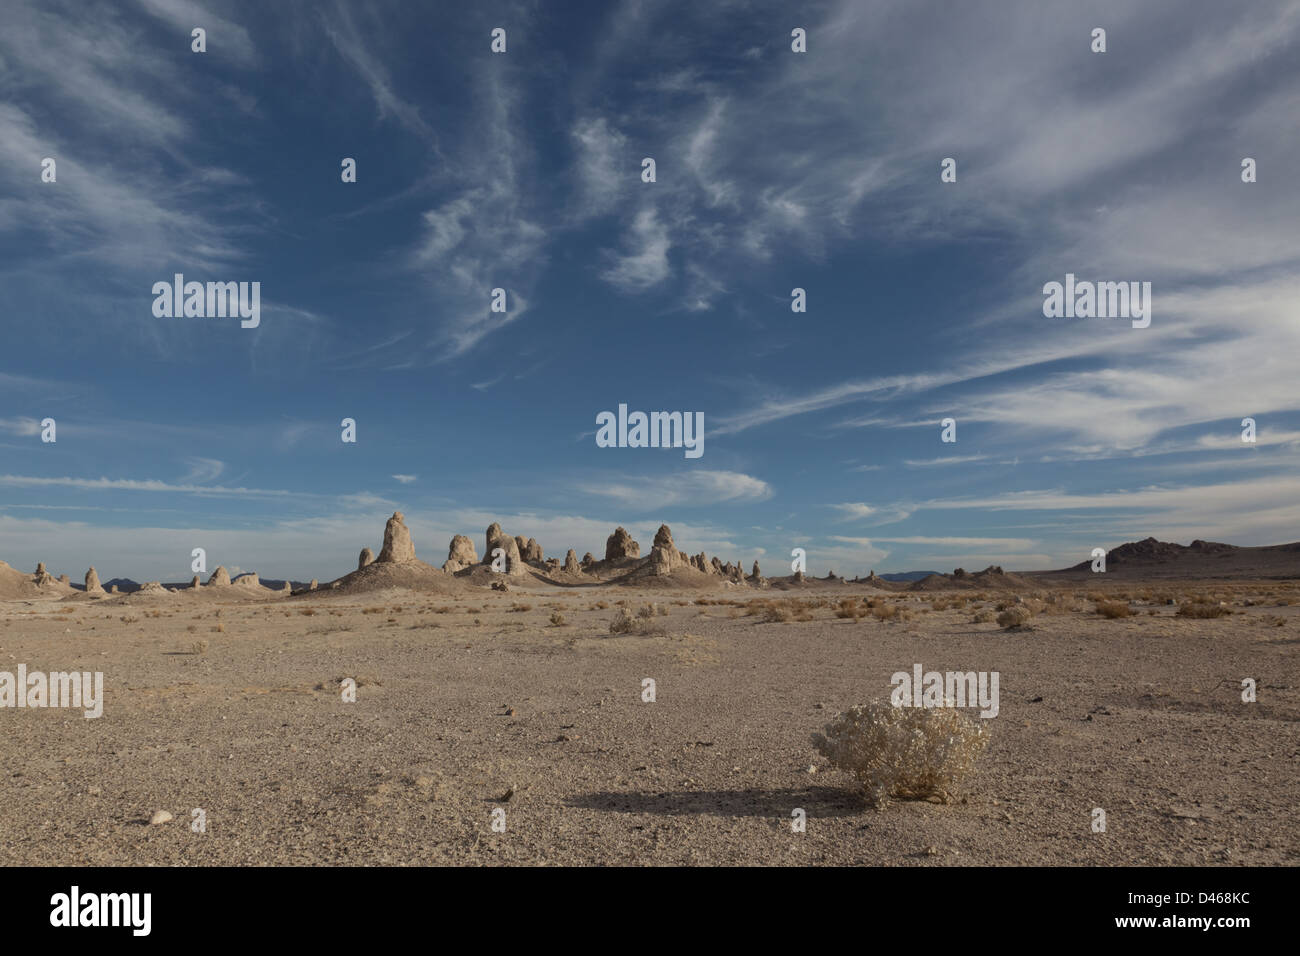 Le trona Pinnacles, California desert National Conservation Area Banque D'Images